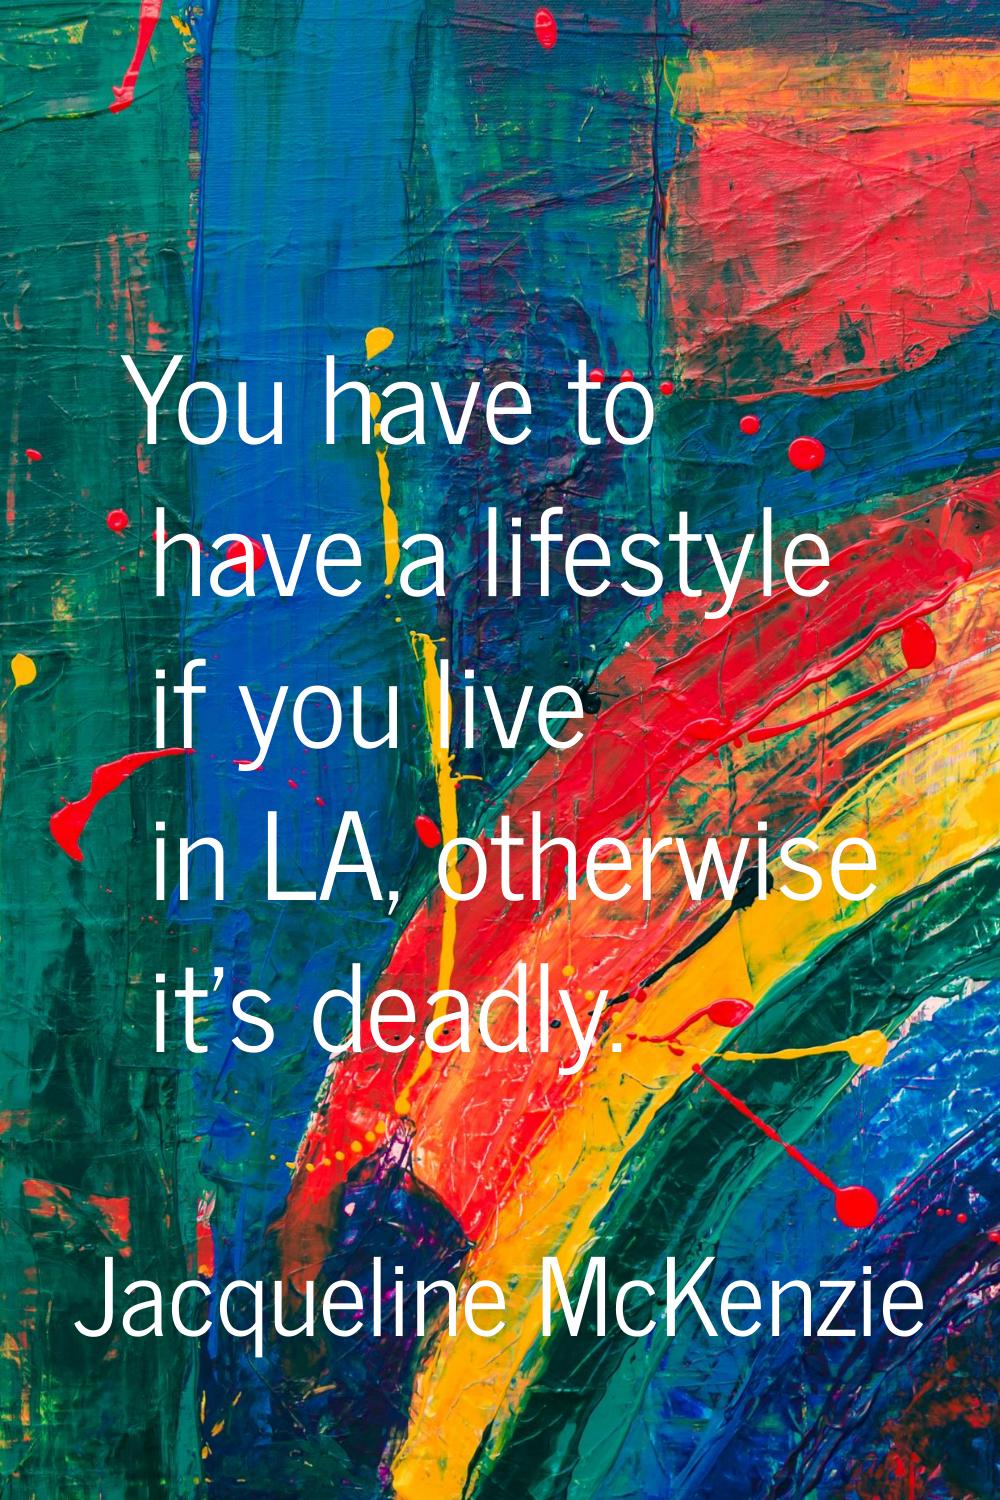 You have to have a lifestyle if you live in LA, otherwise it's deadly.